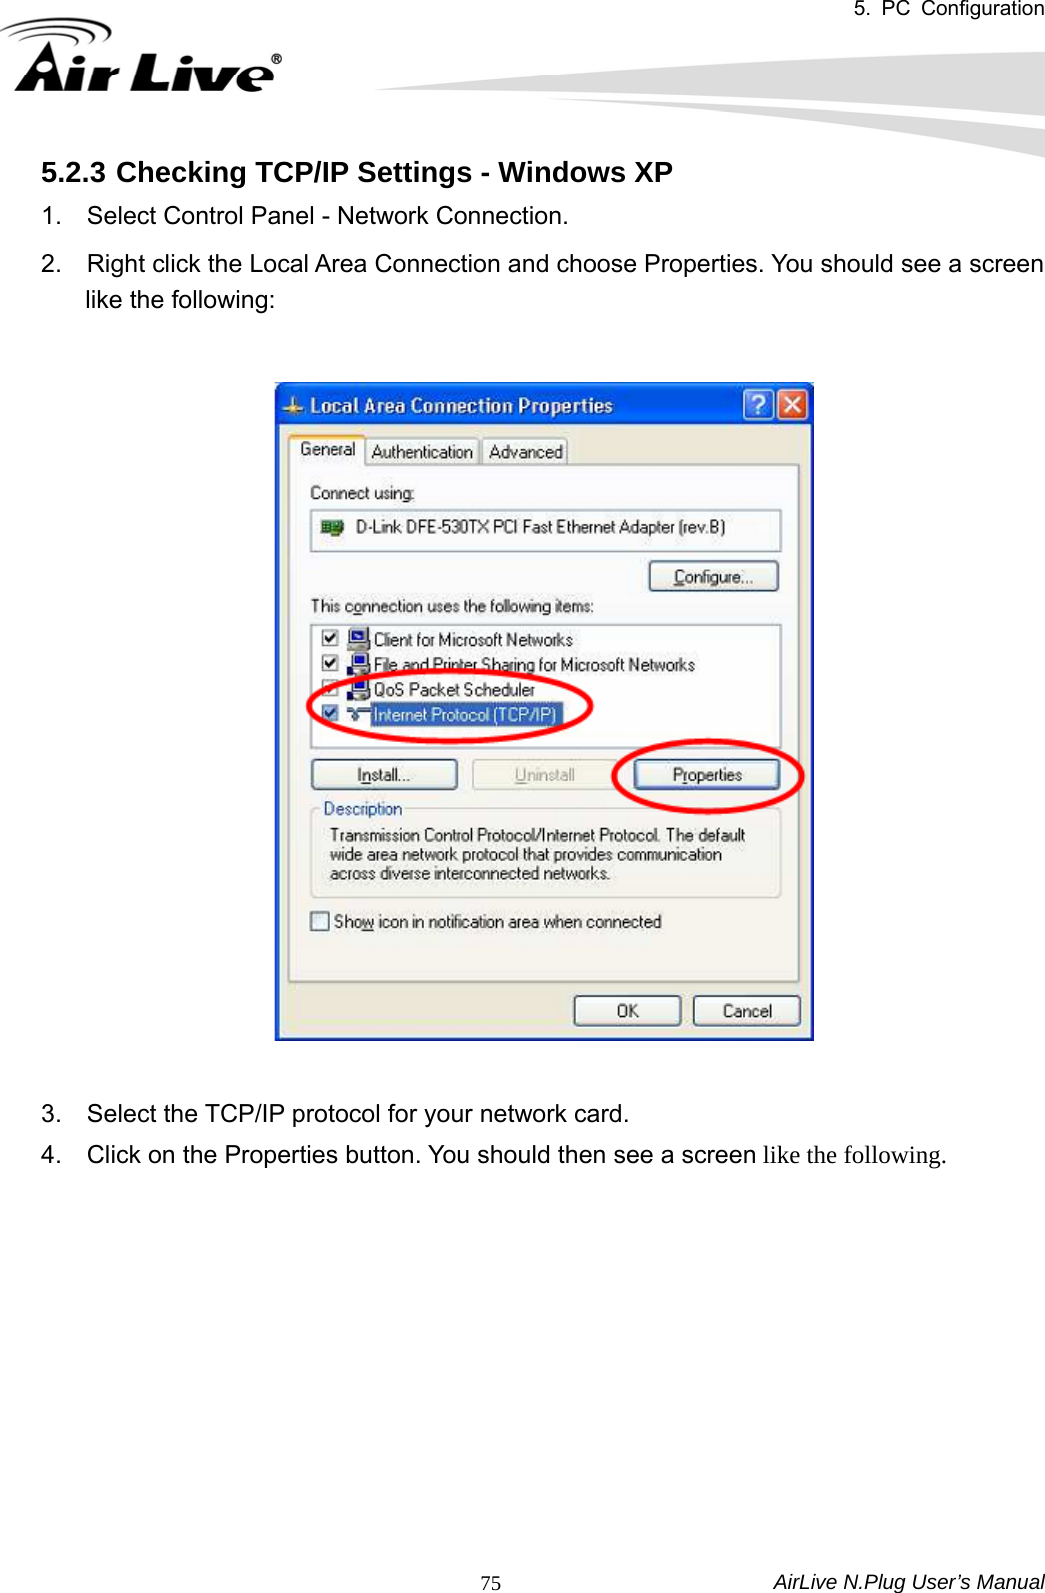 5. PC Configuration  AirLive N.Plug User’s Manual  755.2.3 Checking TCP/IP Settings - Windows XP 1.    Select Control Panel - Network Connection.   2.    Right click the Local Area Connection and choose Properties. You should see a screen like the following:    3.    Select the TCP/IP protocol for your network card.   4.    Click on the Properties button. You should then see a screen like the following.   